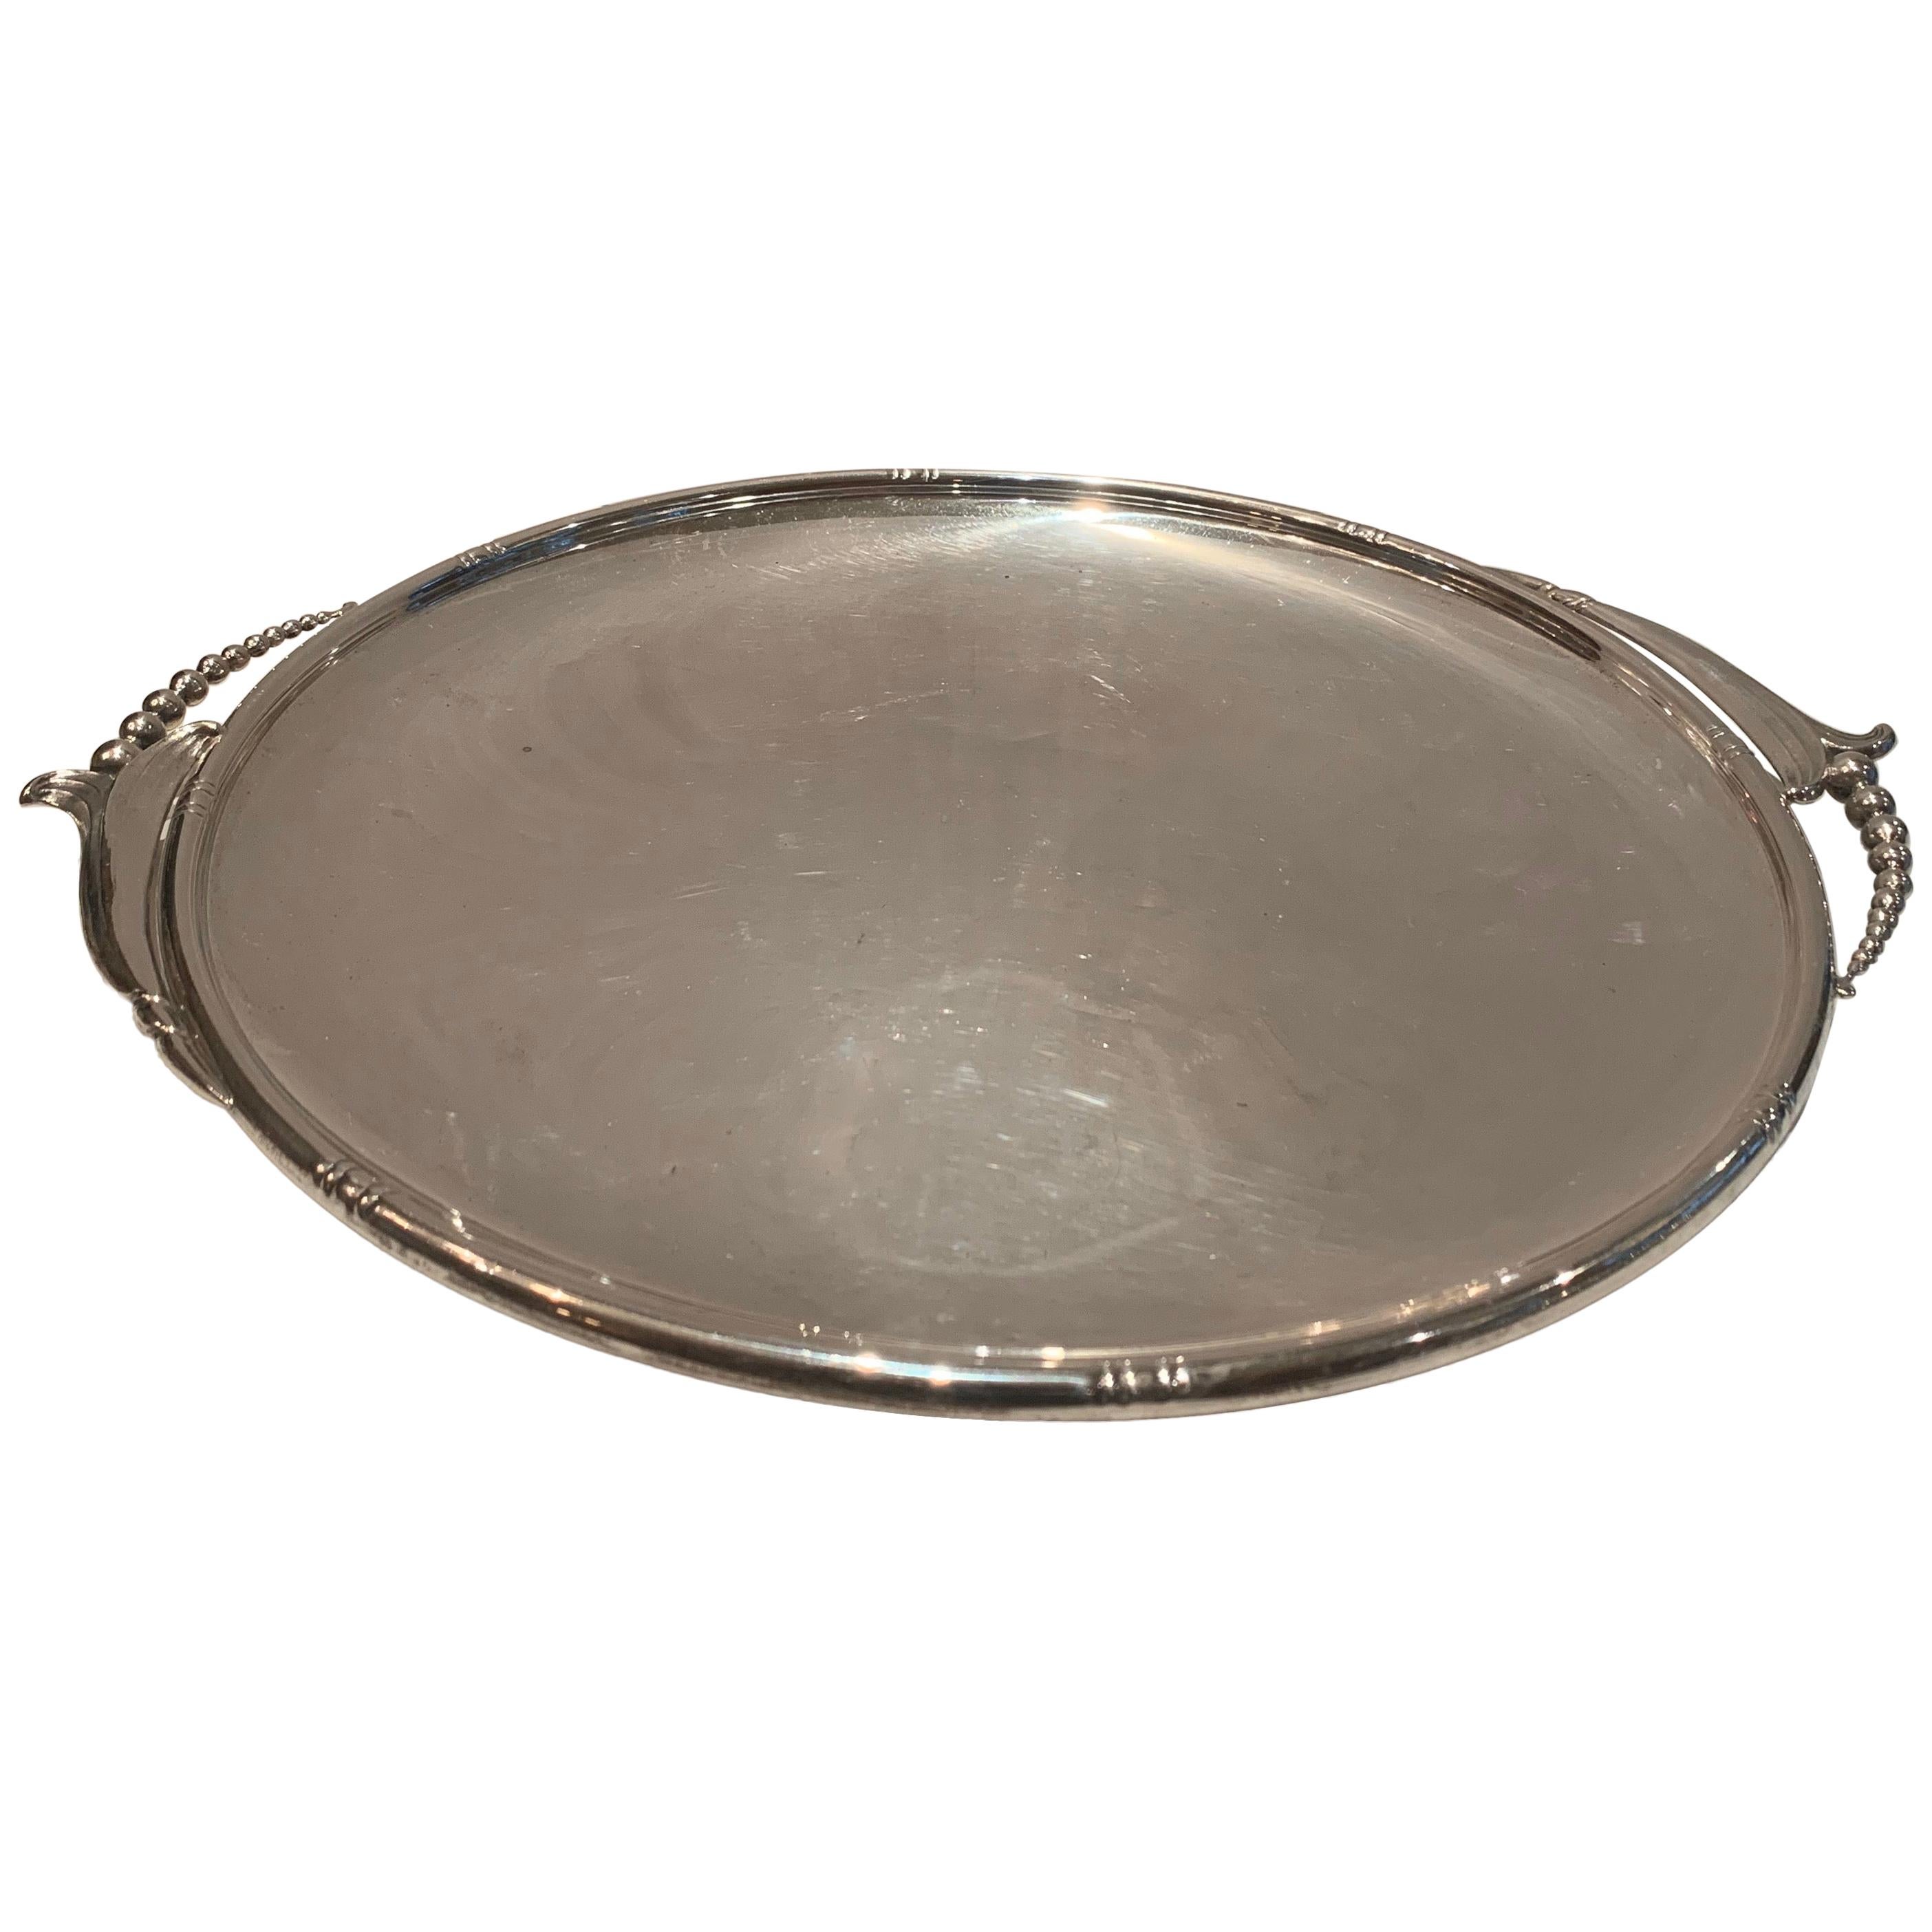 Wonderful Large Art Deco Blossom Wallace Sterling Silver Round Tray Platter